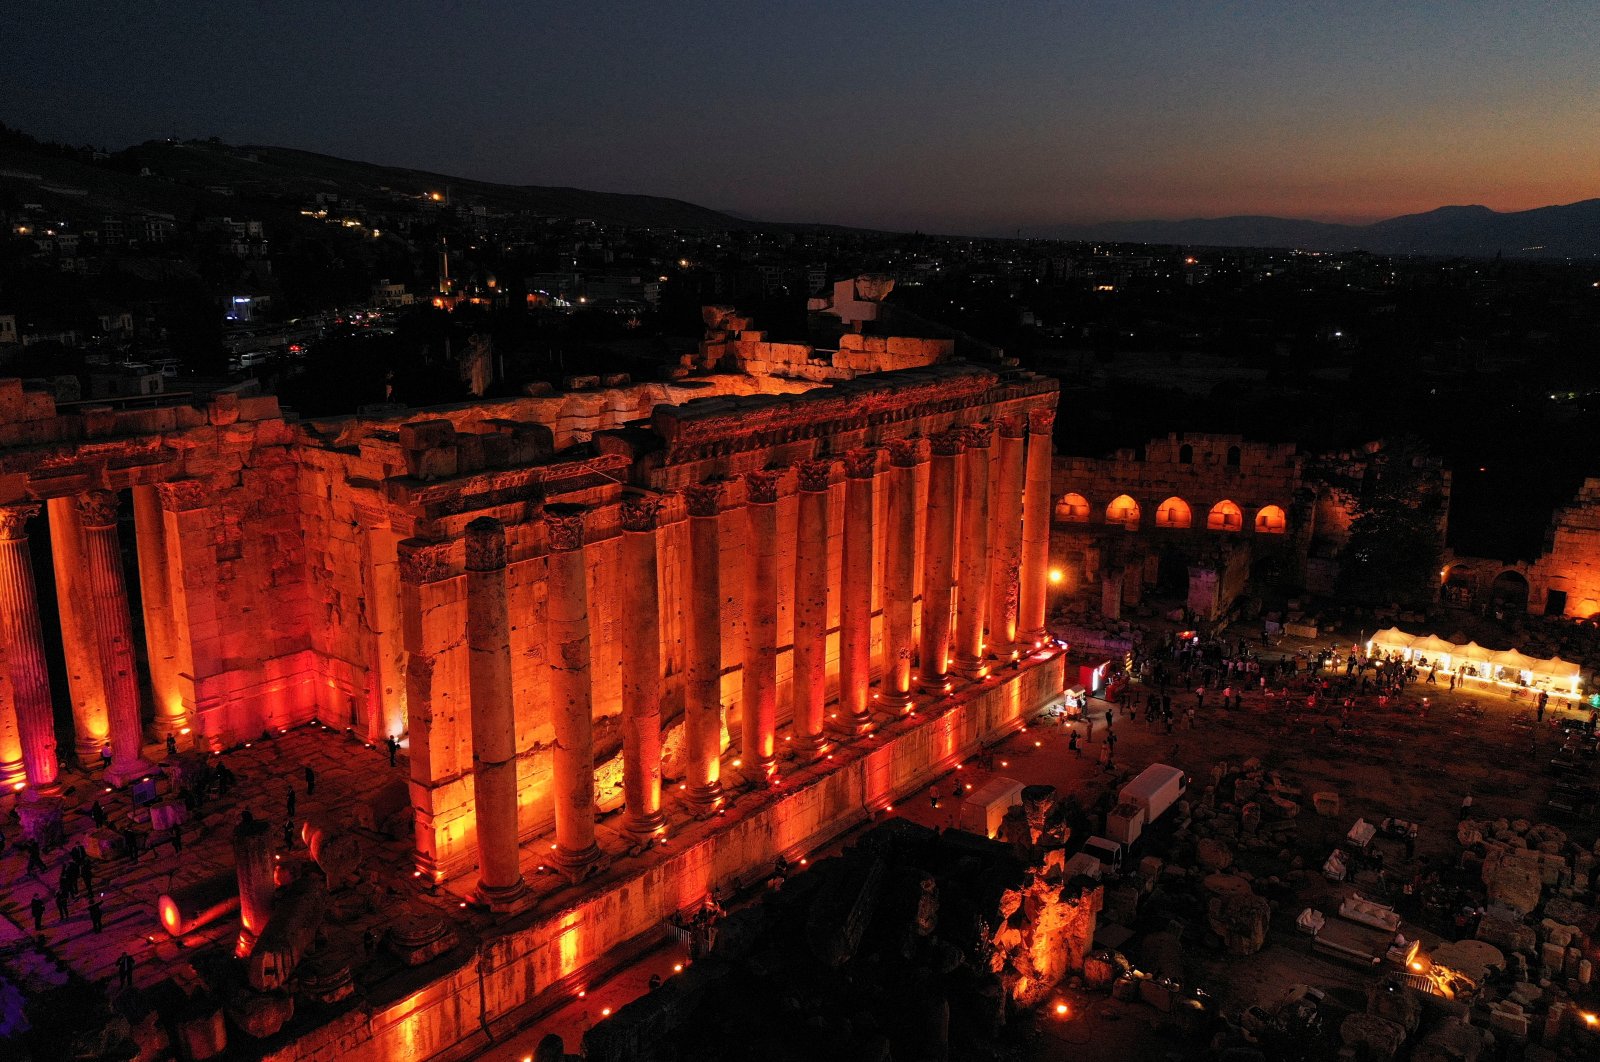 The Temple of Bacchus is illuminated during the opening of the Baalbeck International Festival, in Baalbeck, Lebanon, July 8, 2022. (Reuters Photo)